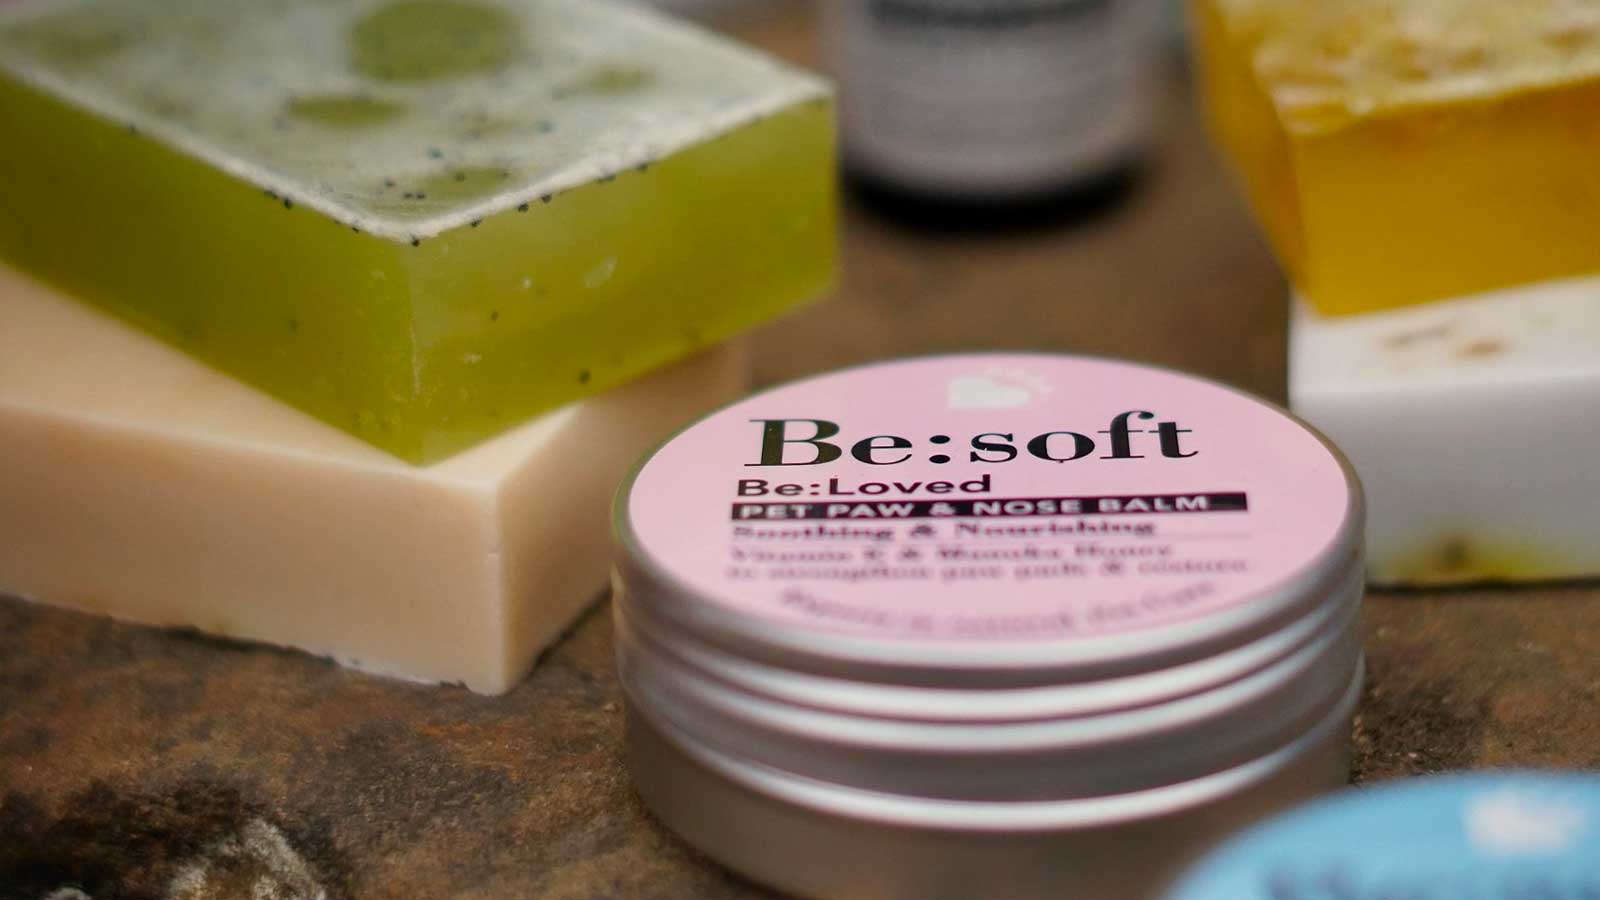 Be:Loved Pet Care Shampoo Bars and Balms